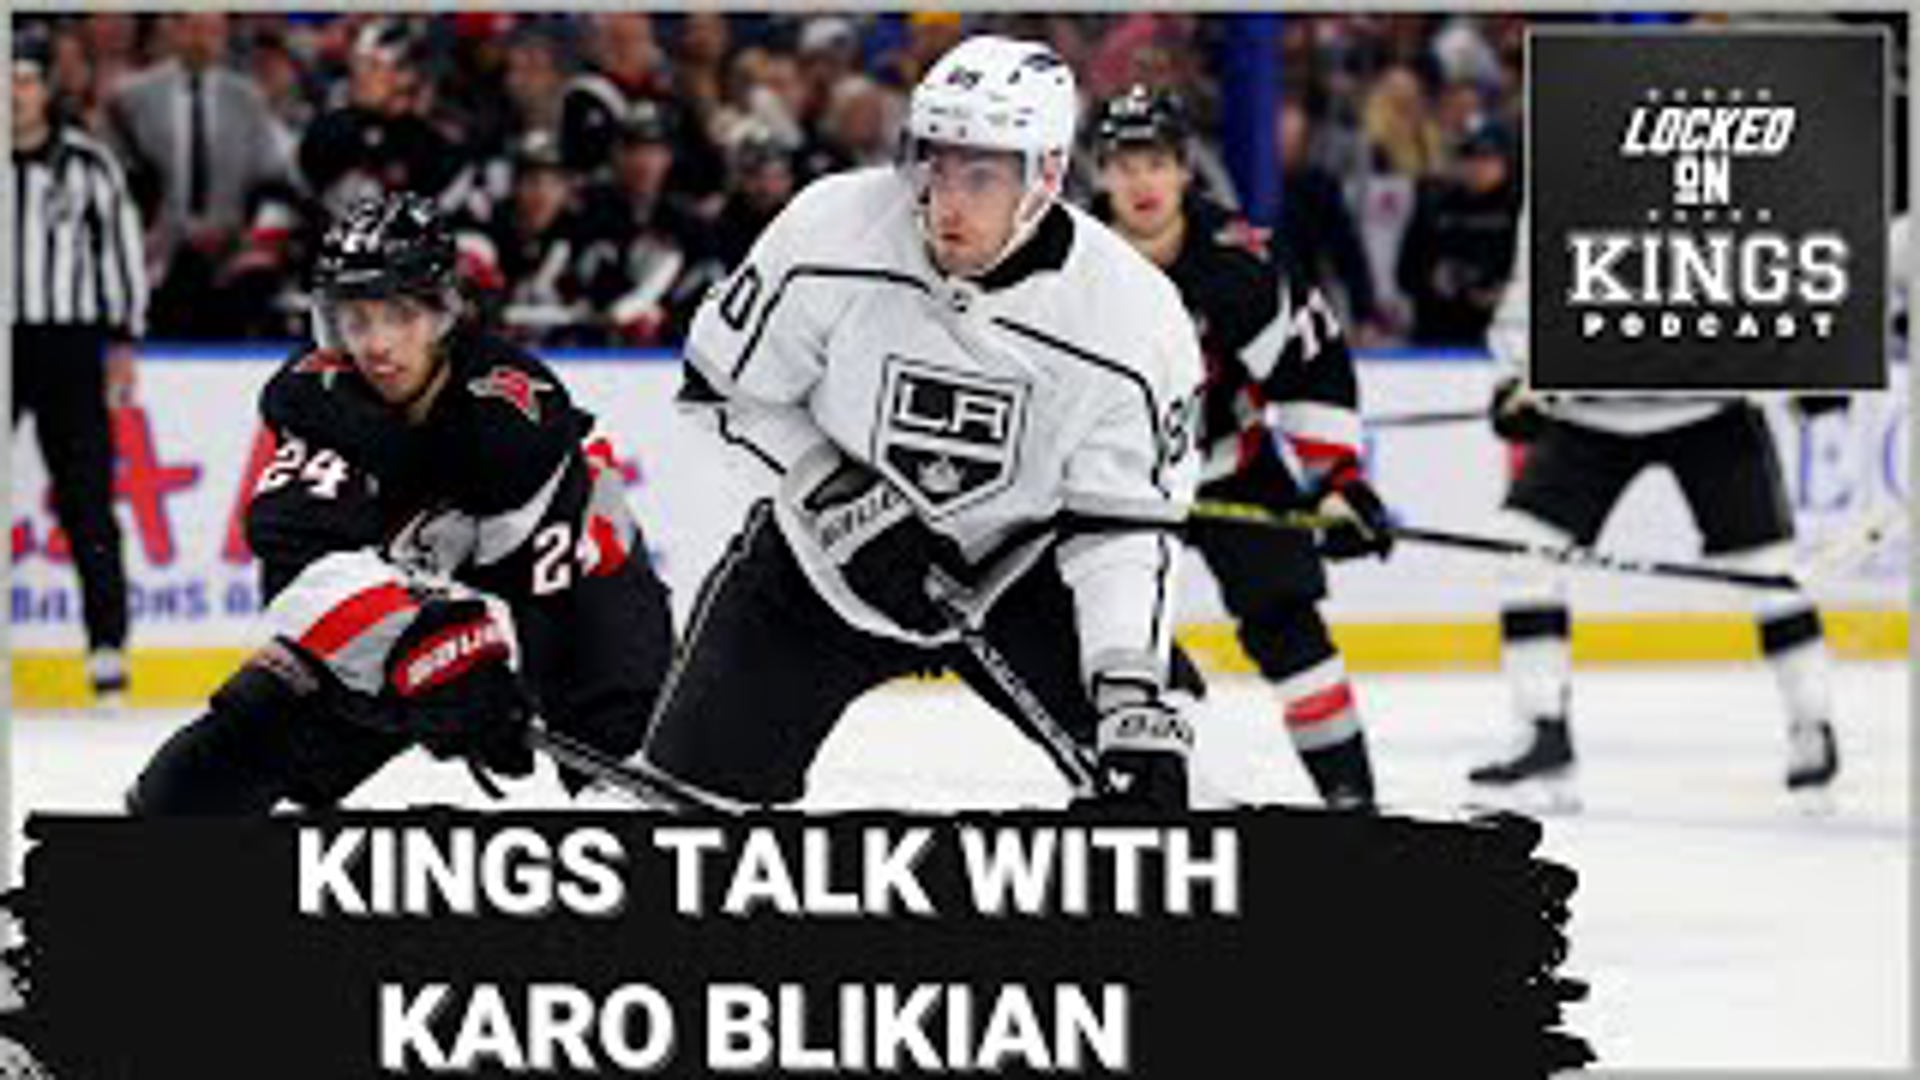 We talk Jim Hiller, PLD, the outlook for the Kings and more with Karo Blikian of the Bannermen Podcast on this edition of Locked on LA Kings.